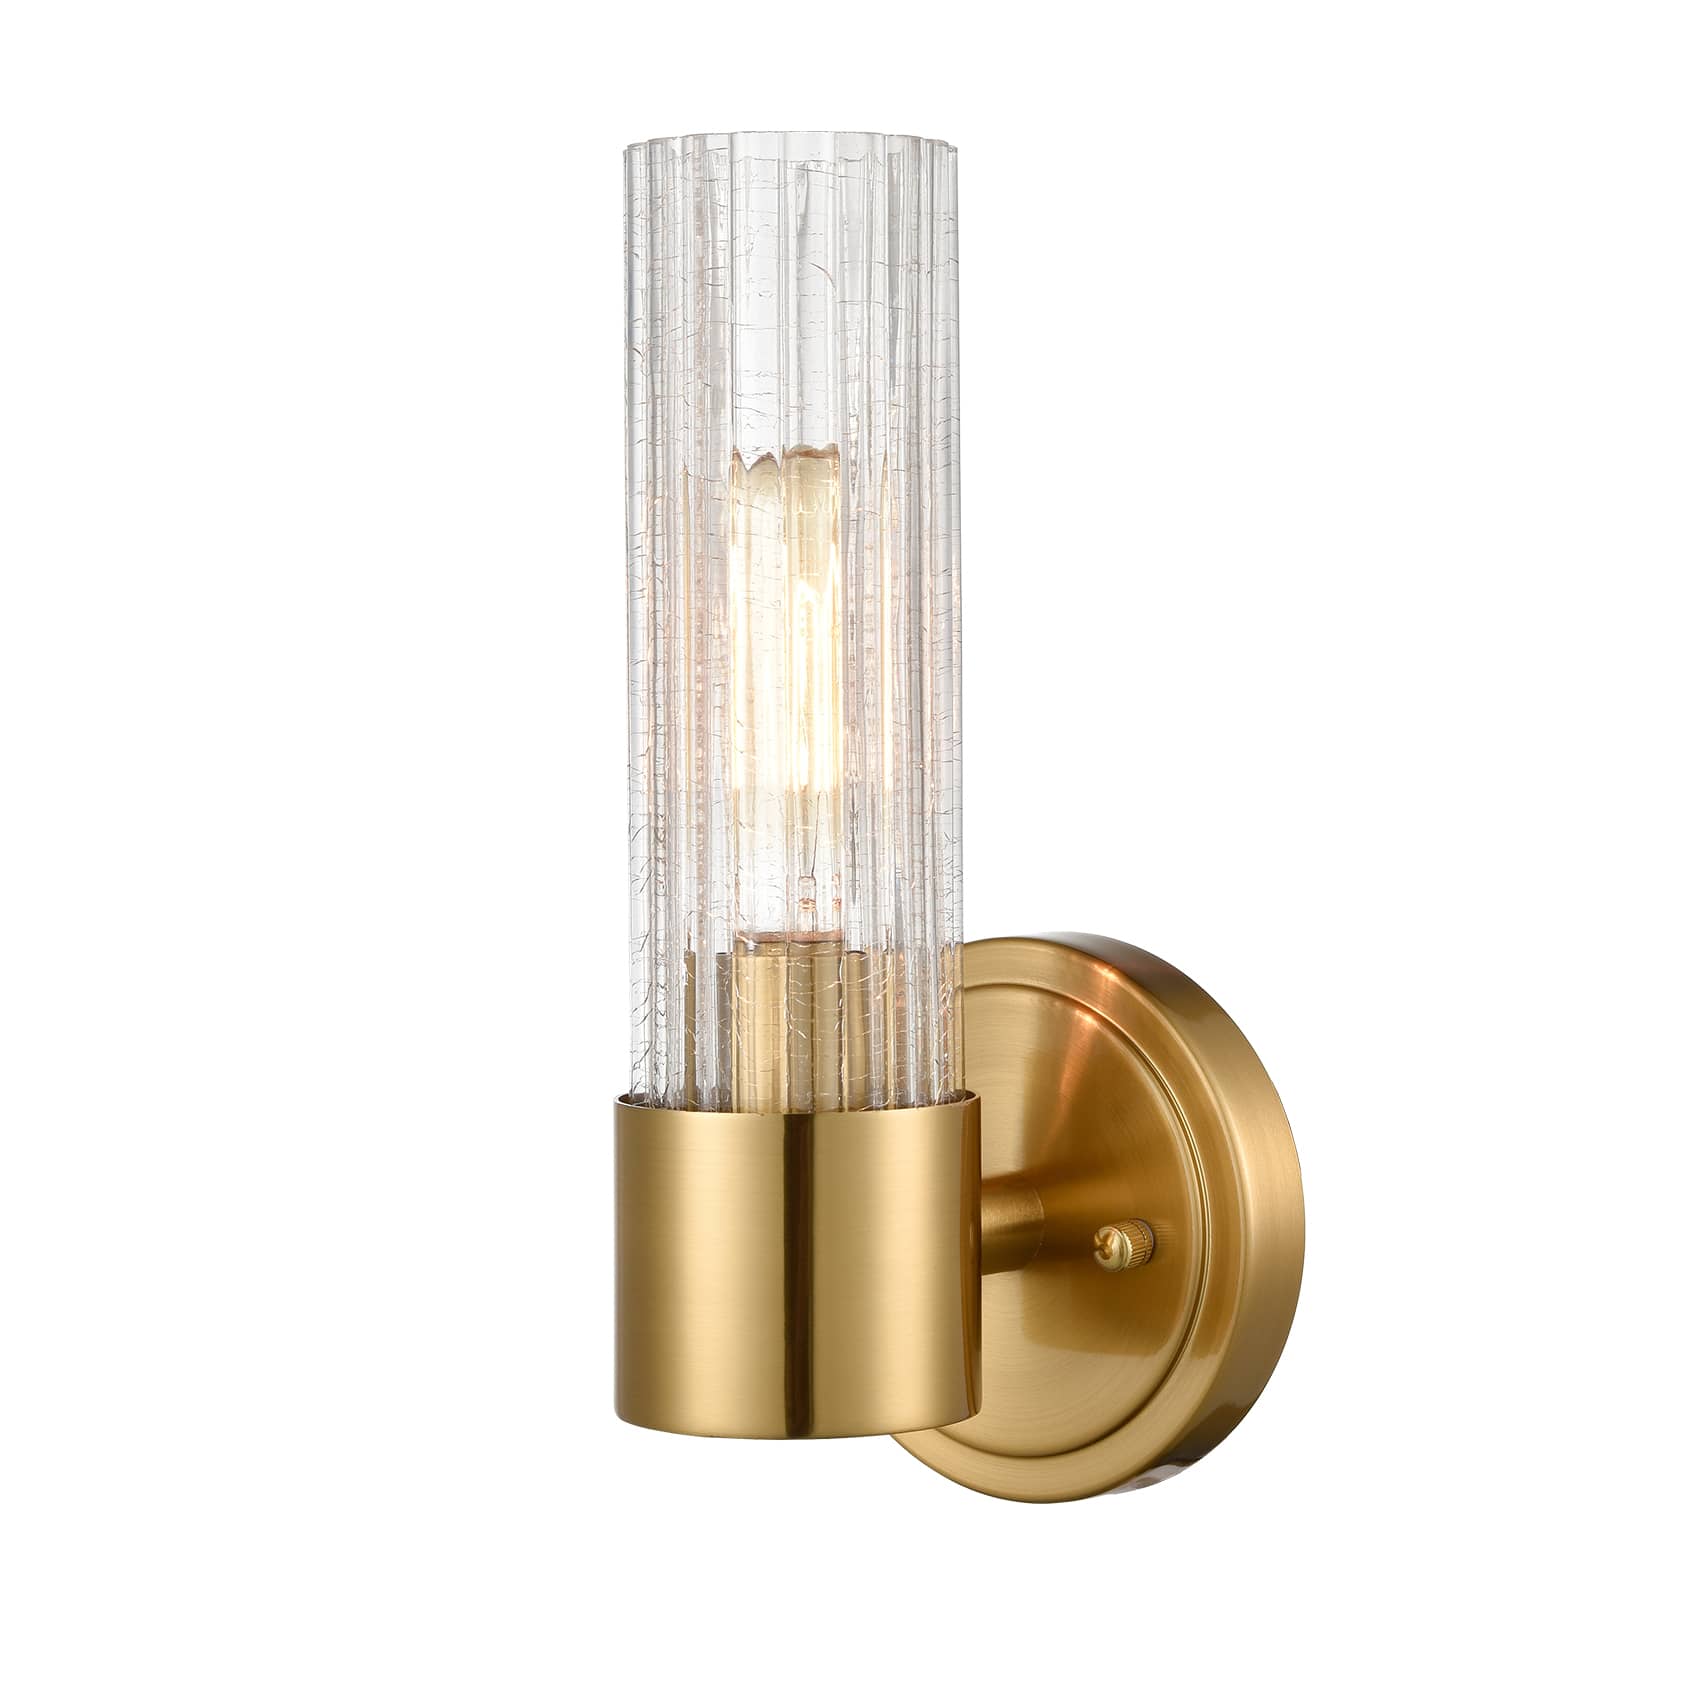 Modern Wall Sconce Light Brass Vanity Light with Crackle Glass